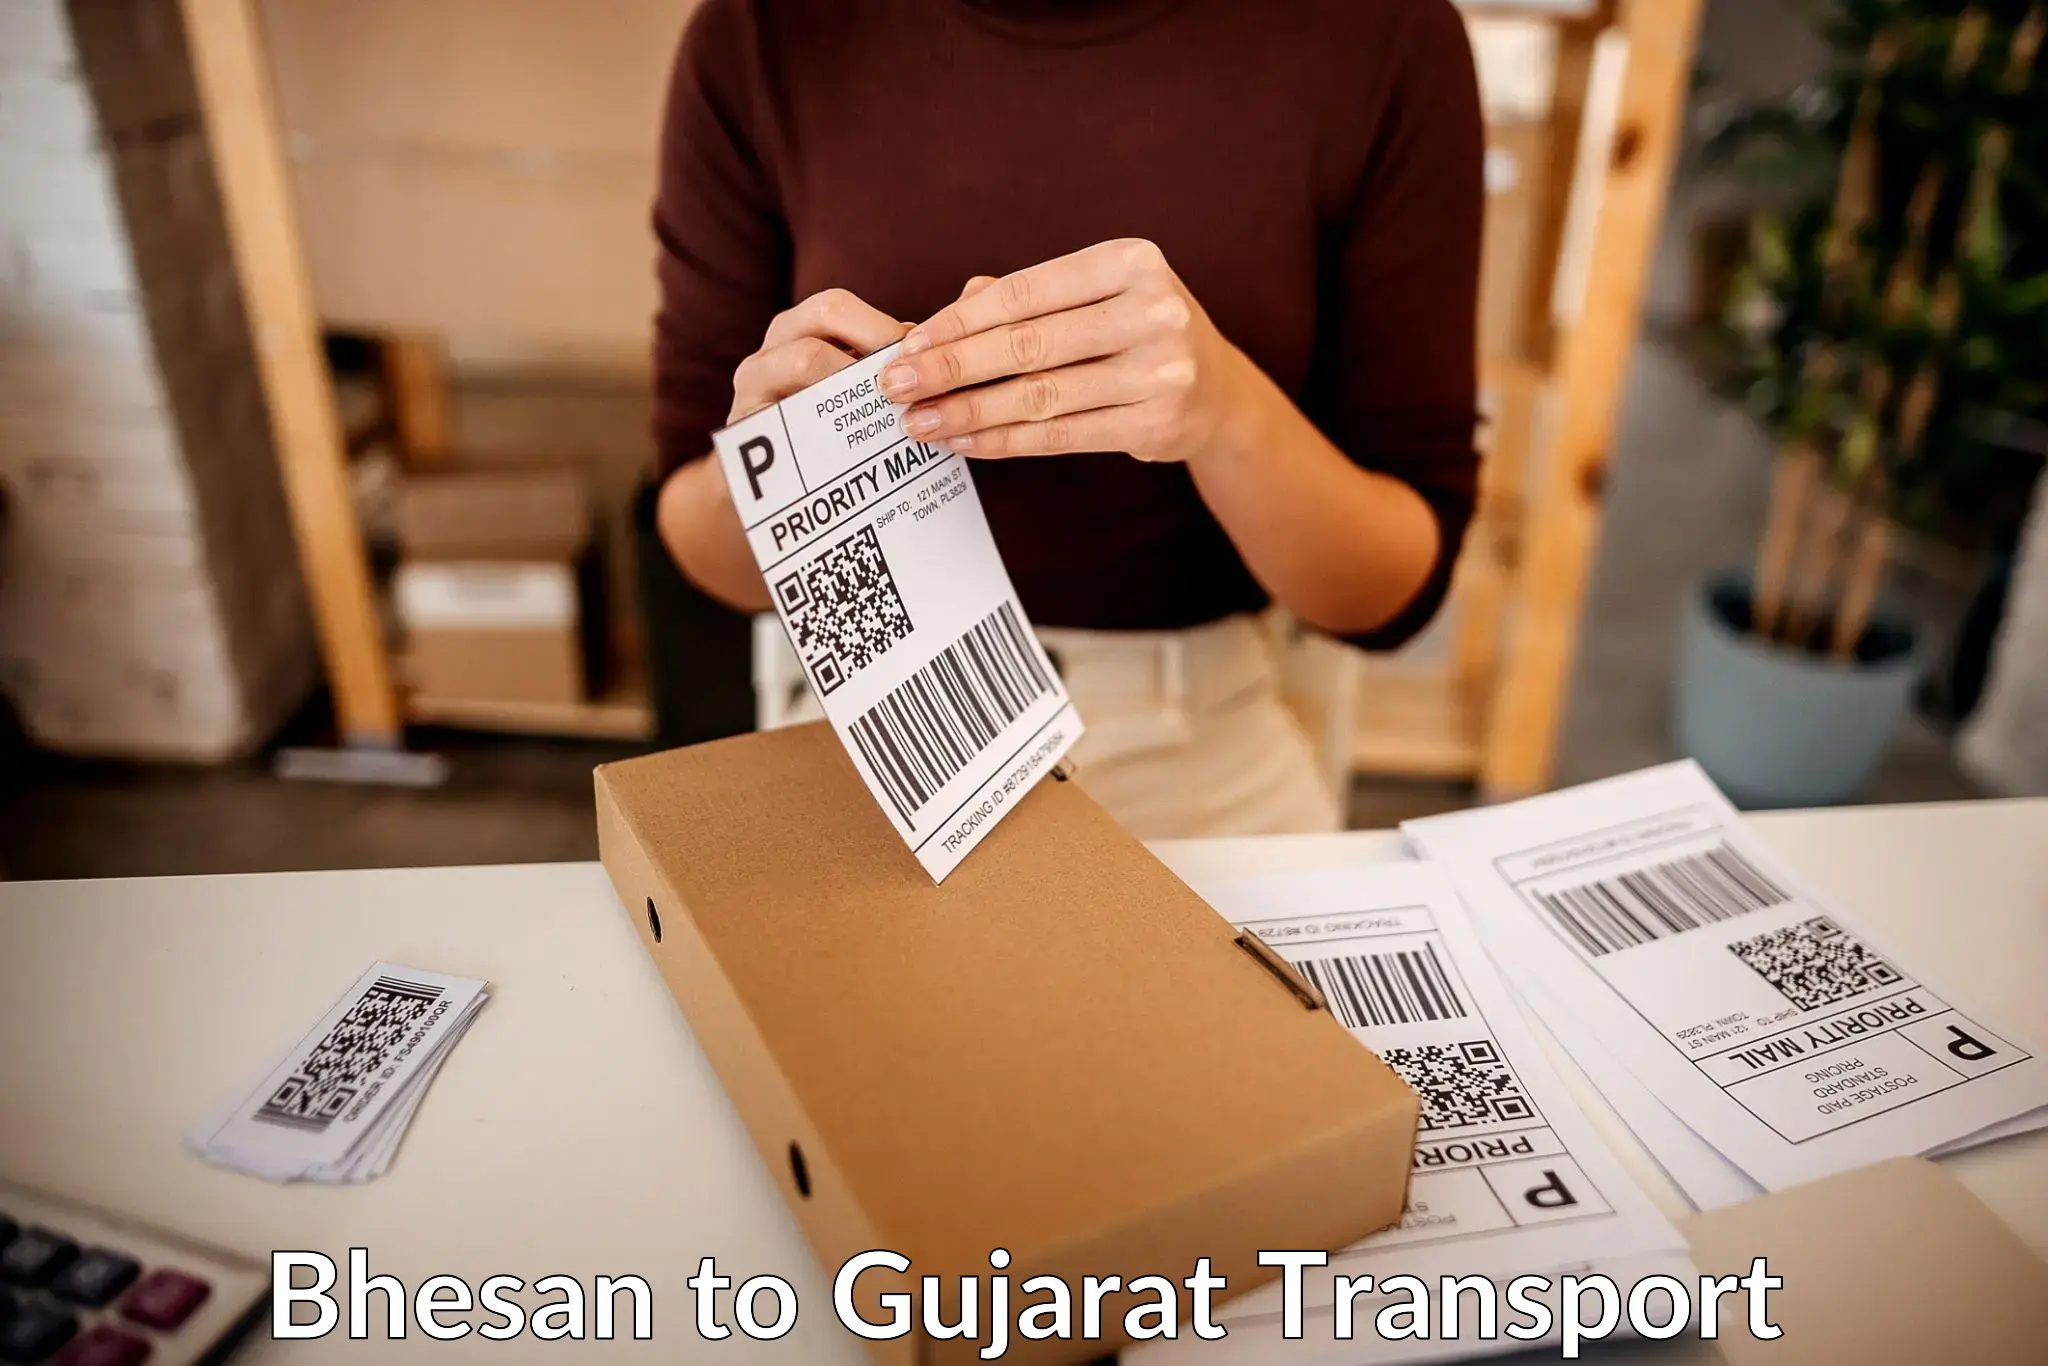 Truck transport companies in India Bhesan to Halvad